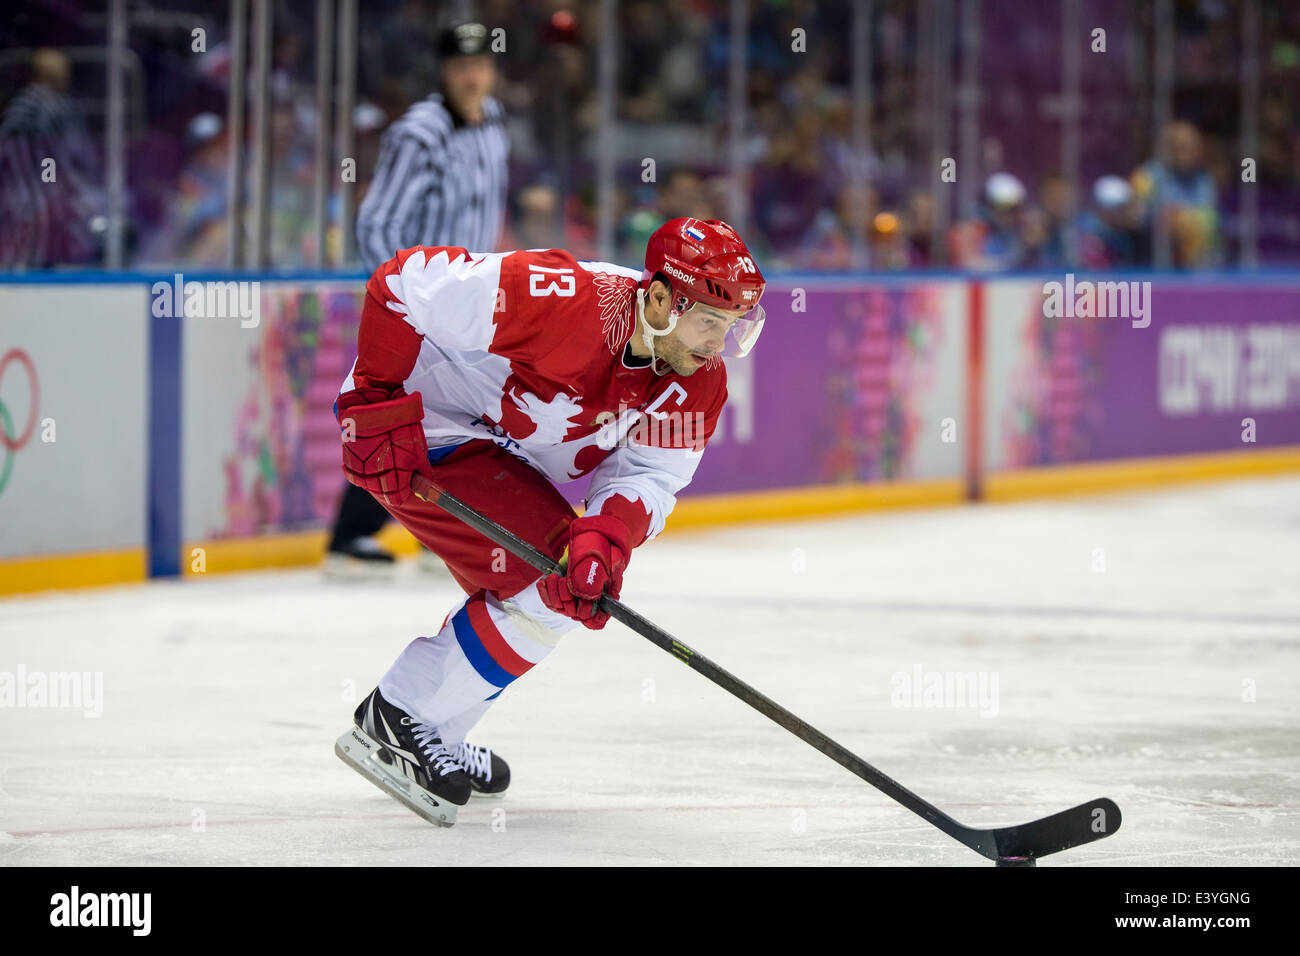 Pavel Datsyuk: Former NHL All-Star to captain Russia's ice hockey team as  they seek gold at Winter Olympics in PyeongChang - Irish Mirror Online